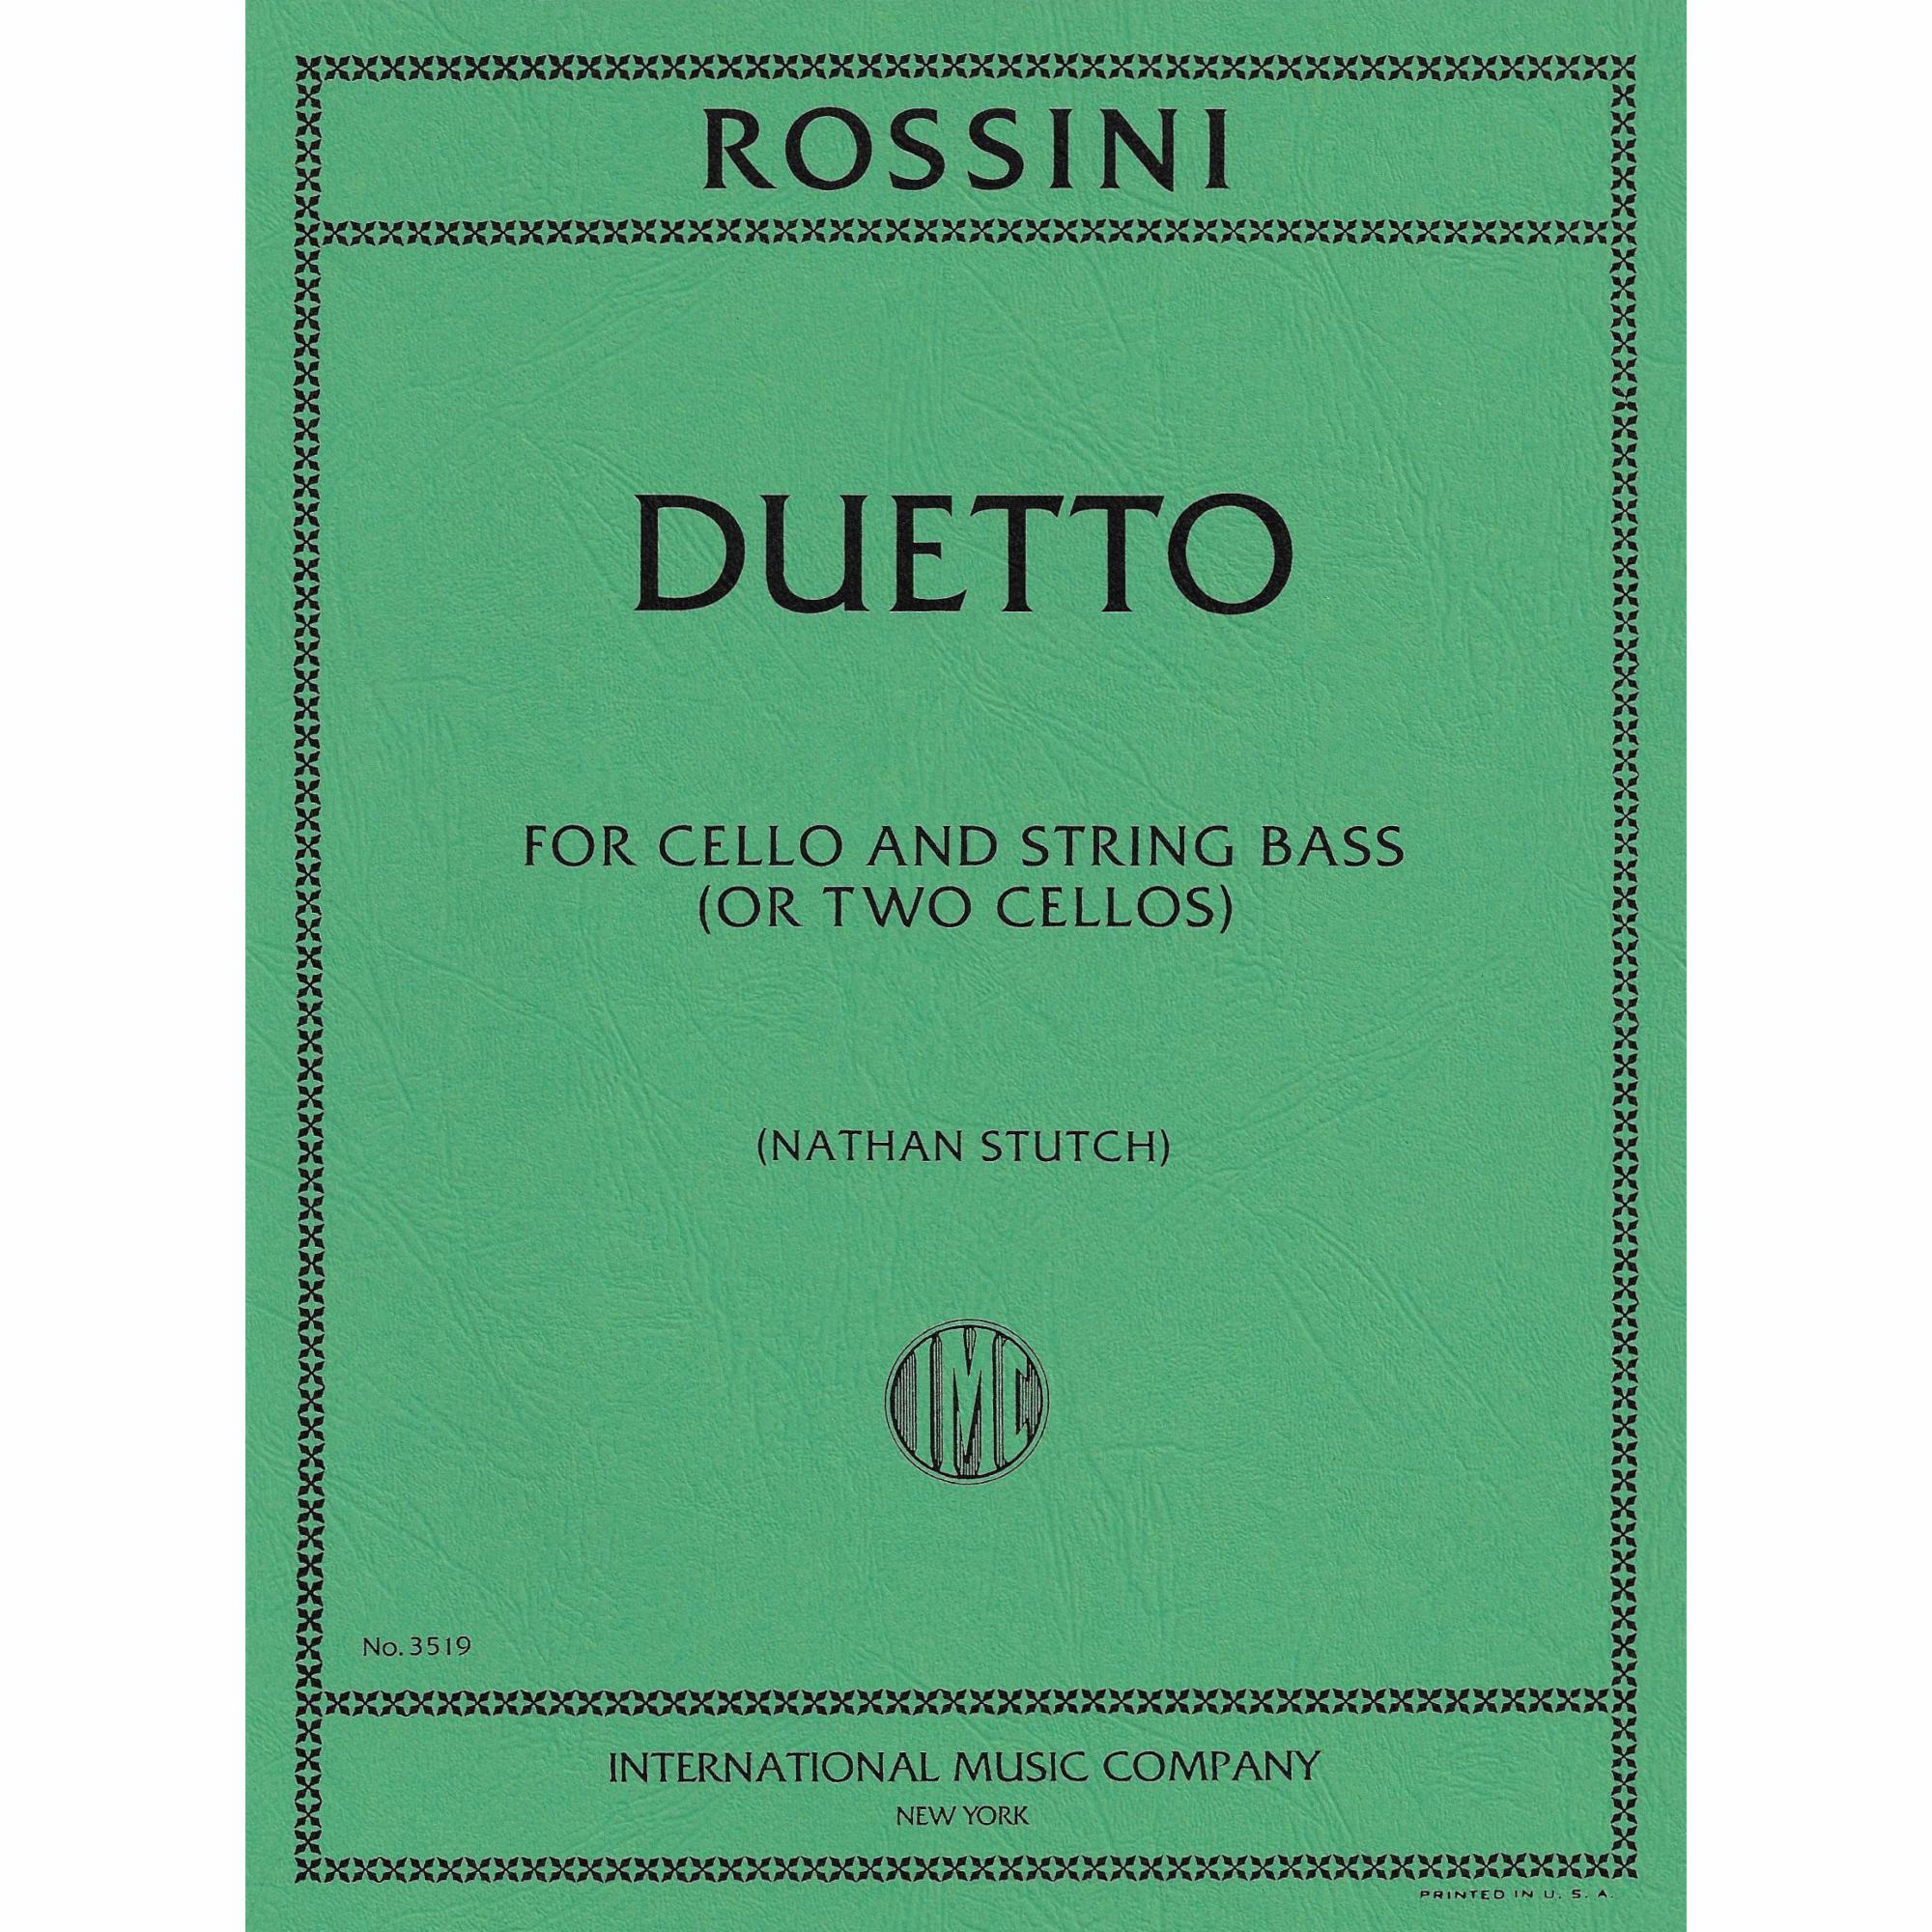 Rossini -- Duetto for Cello and Bass (or Two Cellos)